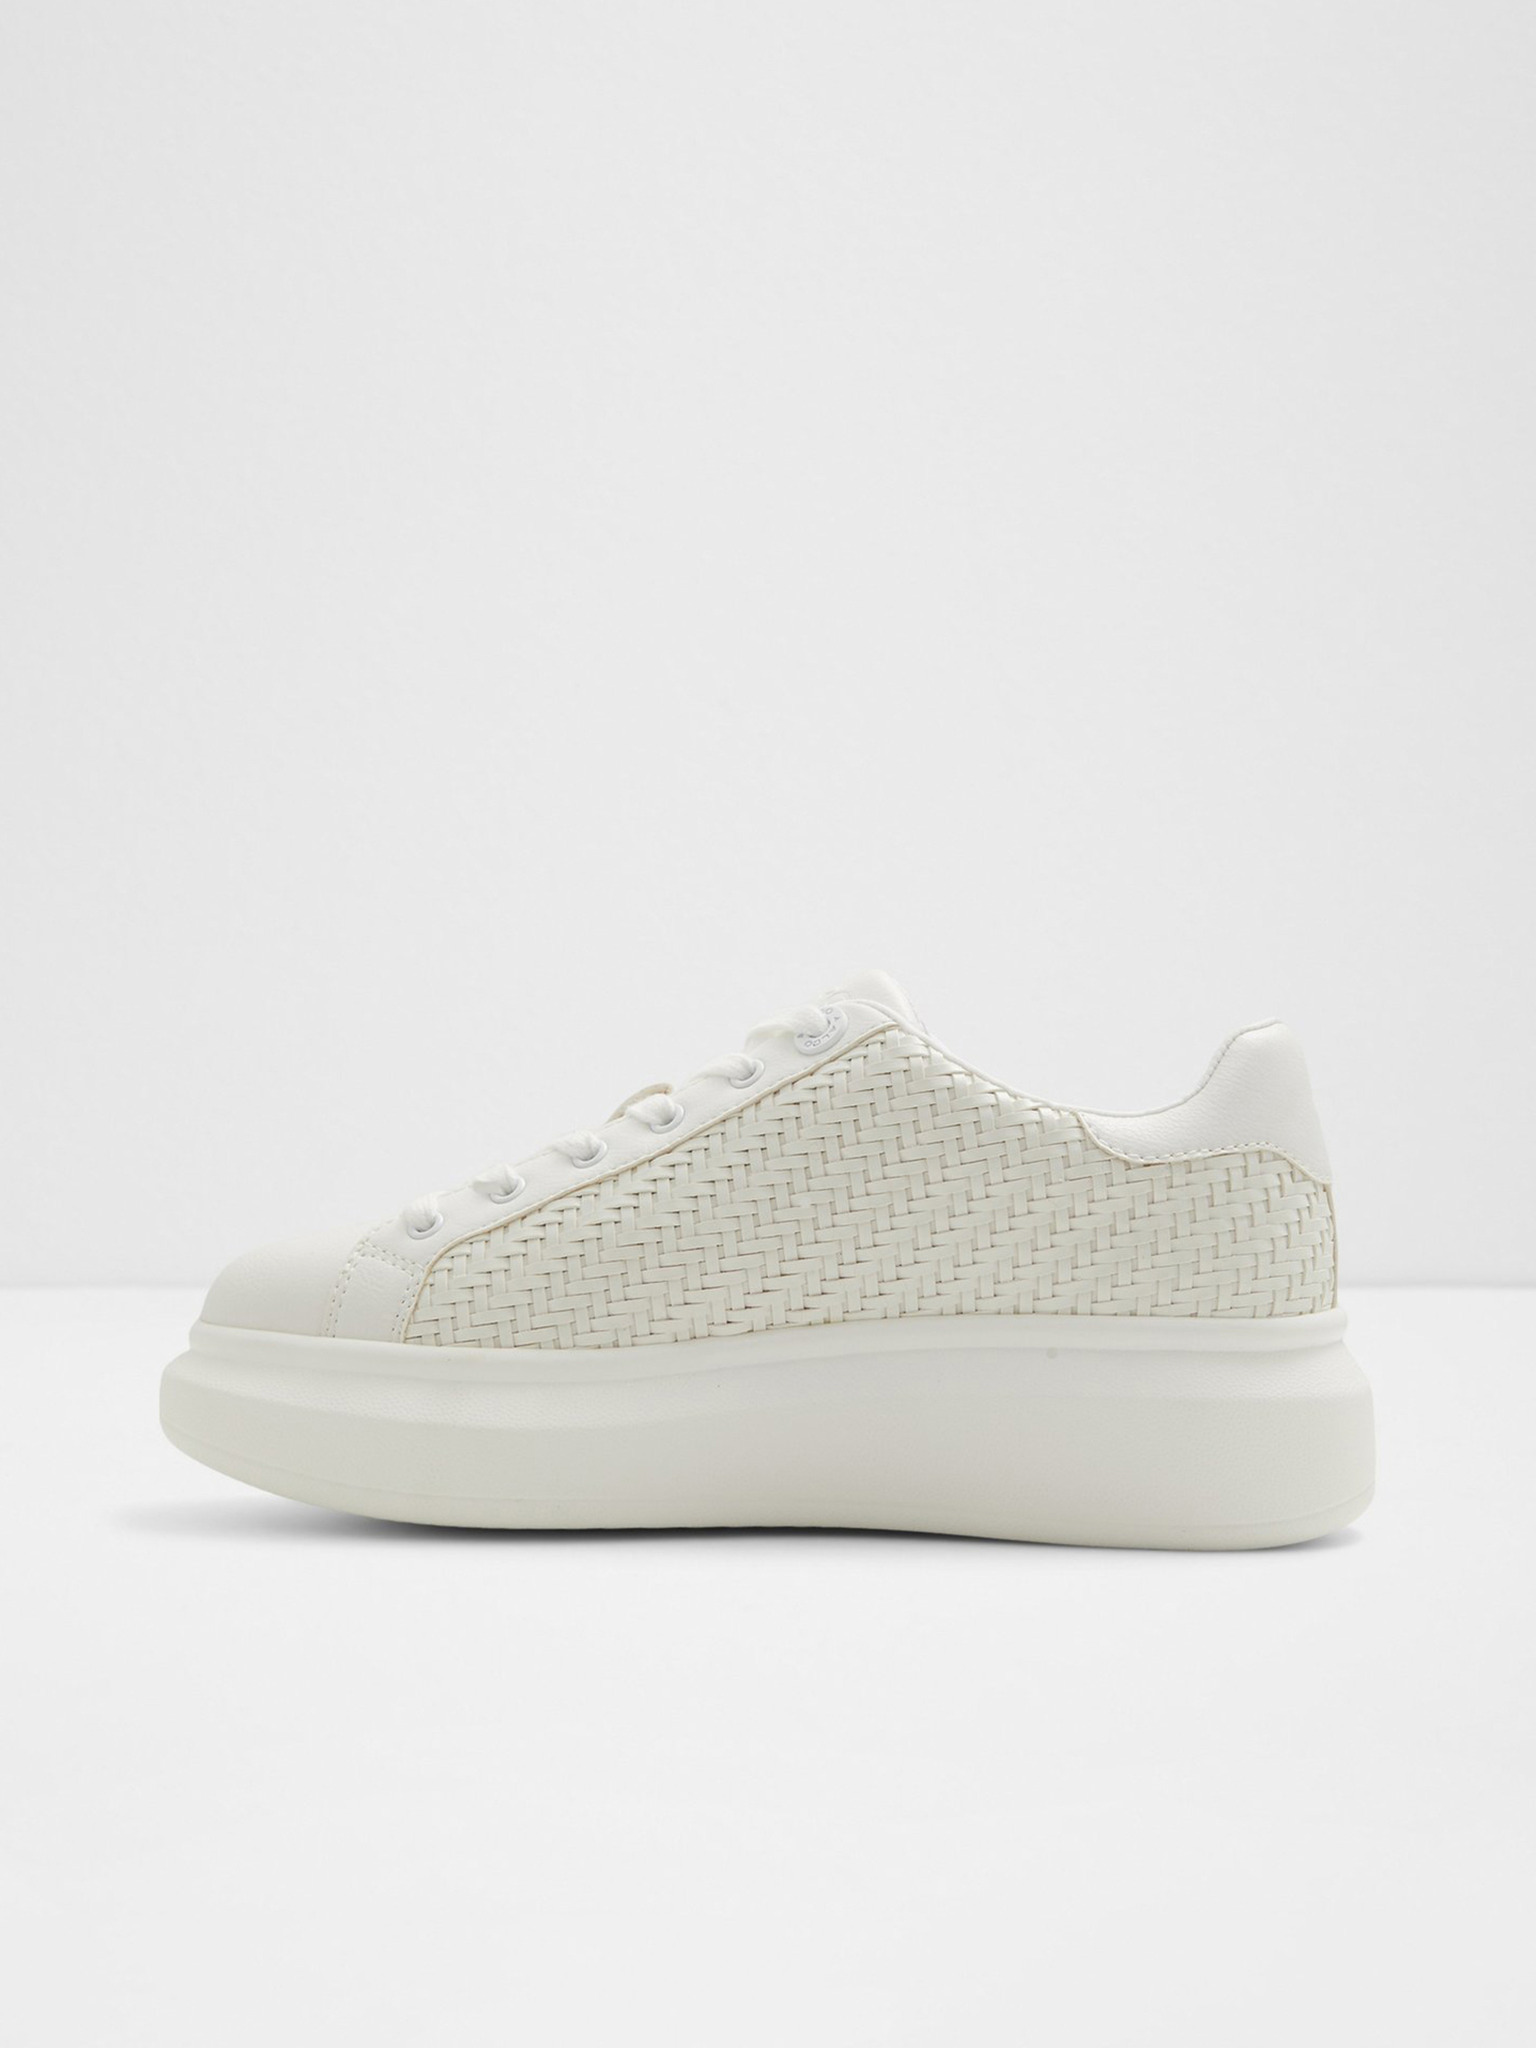 Aldo Solid White Sneakers Size 8 - 64% off | ThredUp